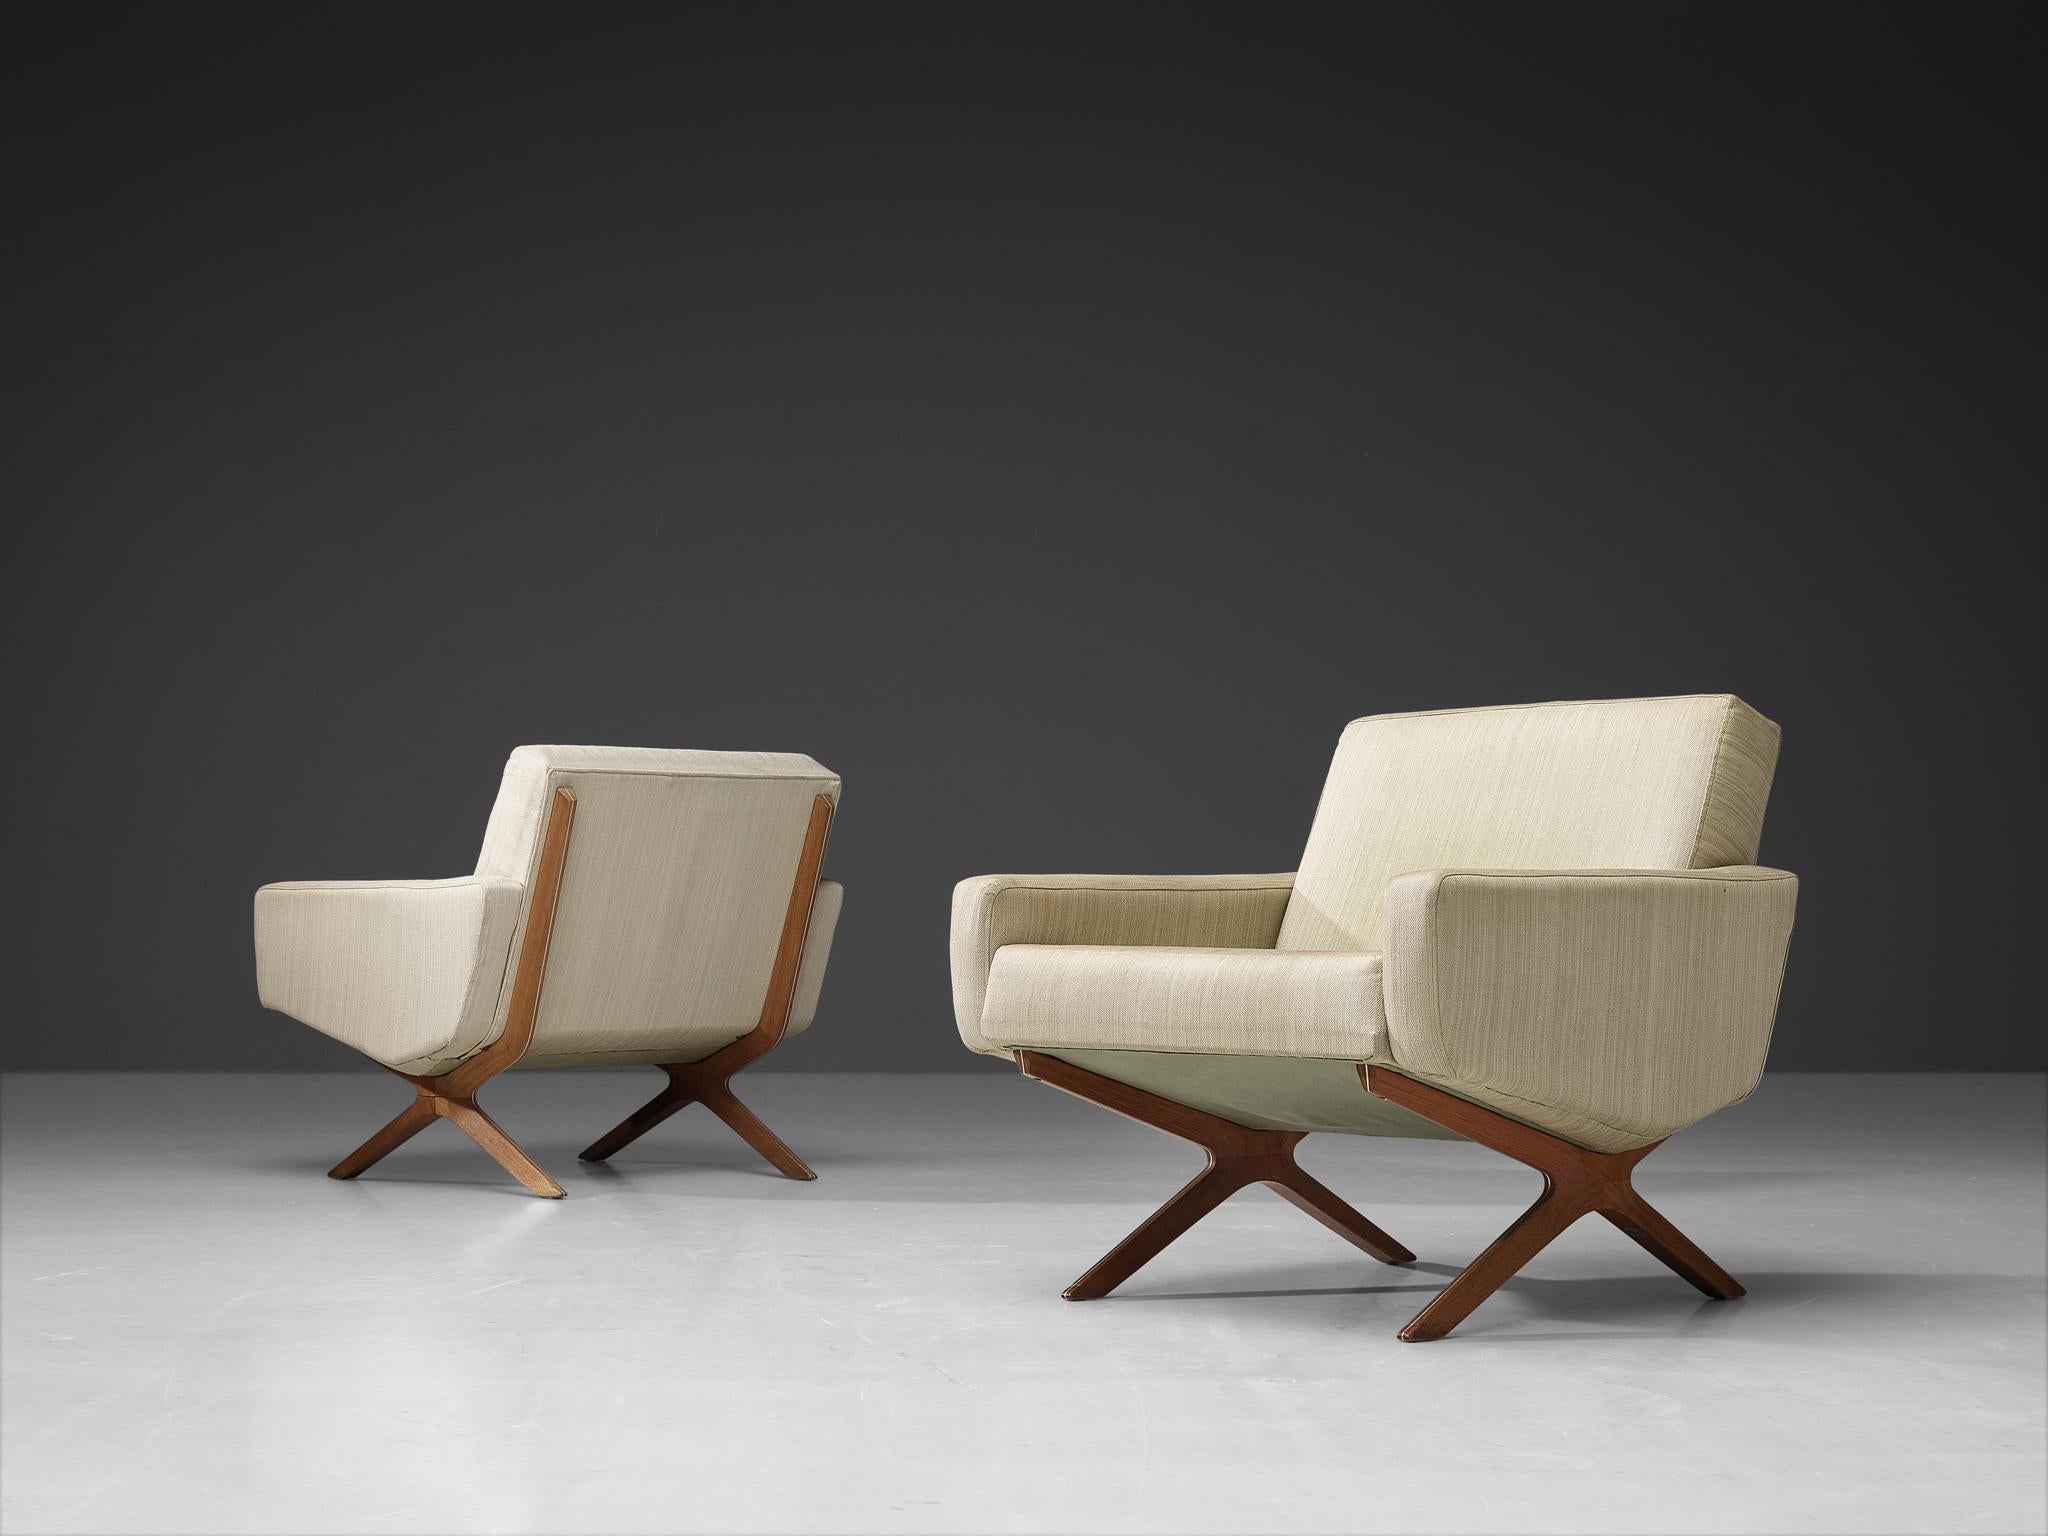 Peter Hvidt & Orla Mølgaard Nielsen for France & Søn, lounge chairs, model ´Silverline´, teak, off-white fabric and metal, 1960s.

Comfortable lounge chairs with an architectural design by Danish designers Hvidt & Mølgaard Nielsen. This model is